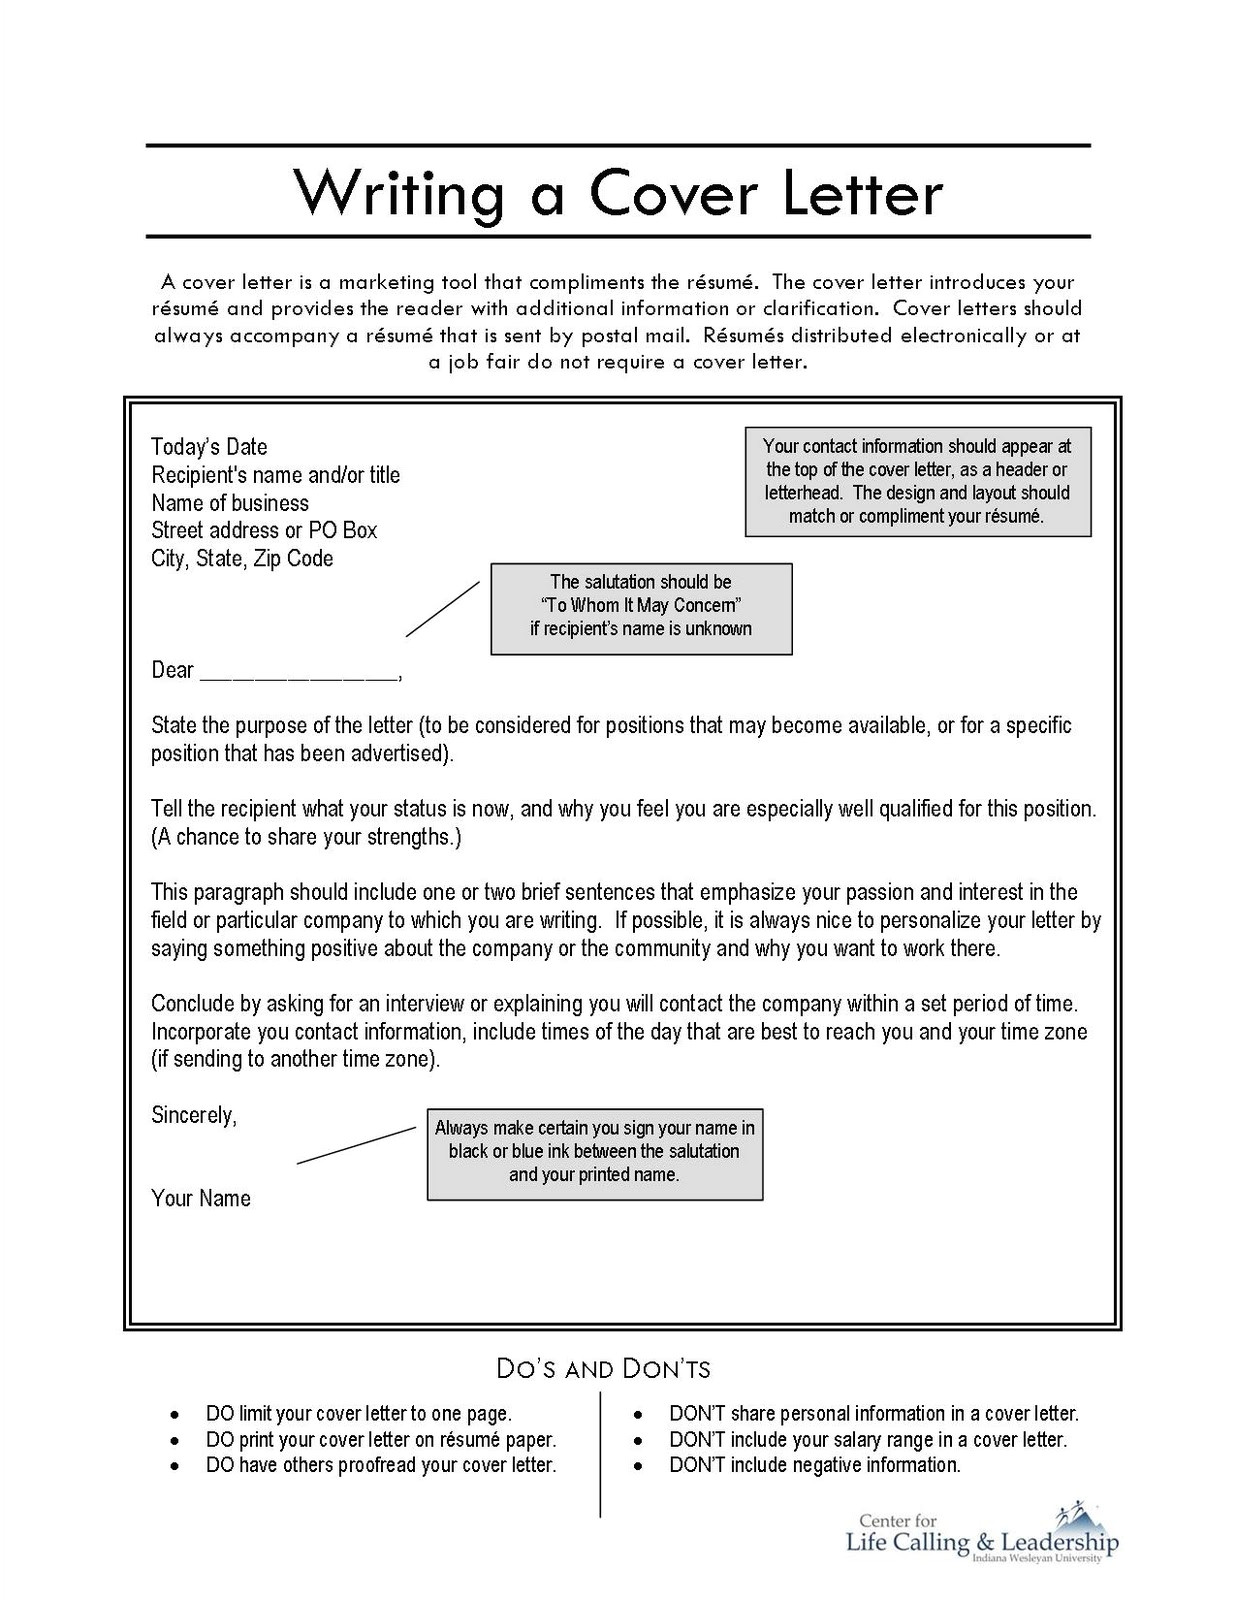 What Should Be In A Cover Letter for A Resume What Should Be Included In A Resume Cover Letter Beautiful